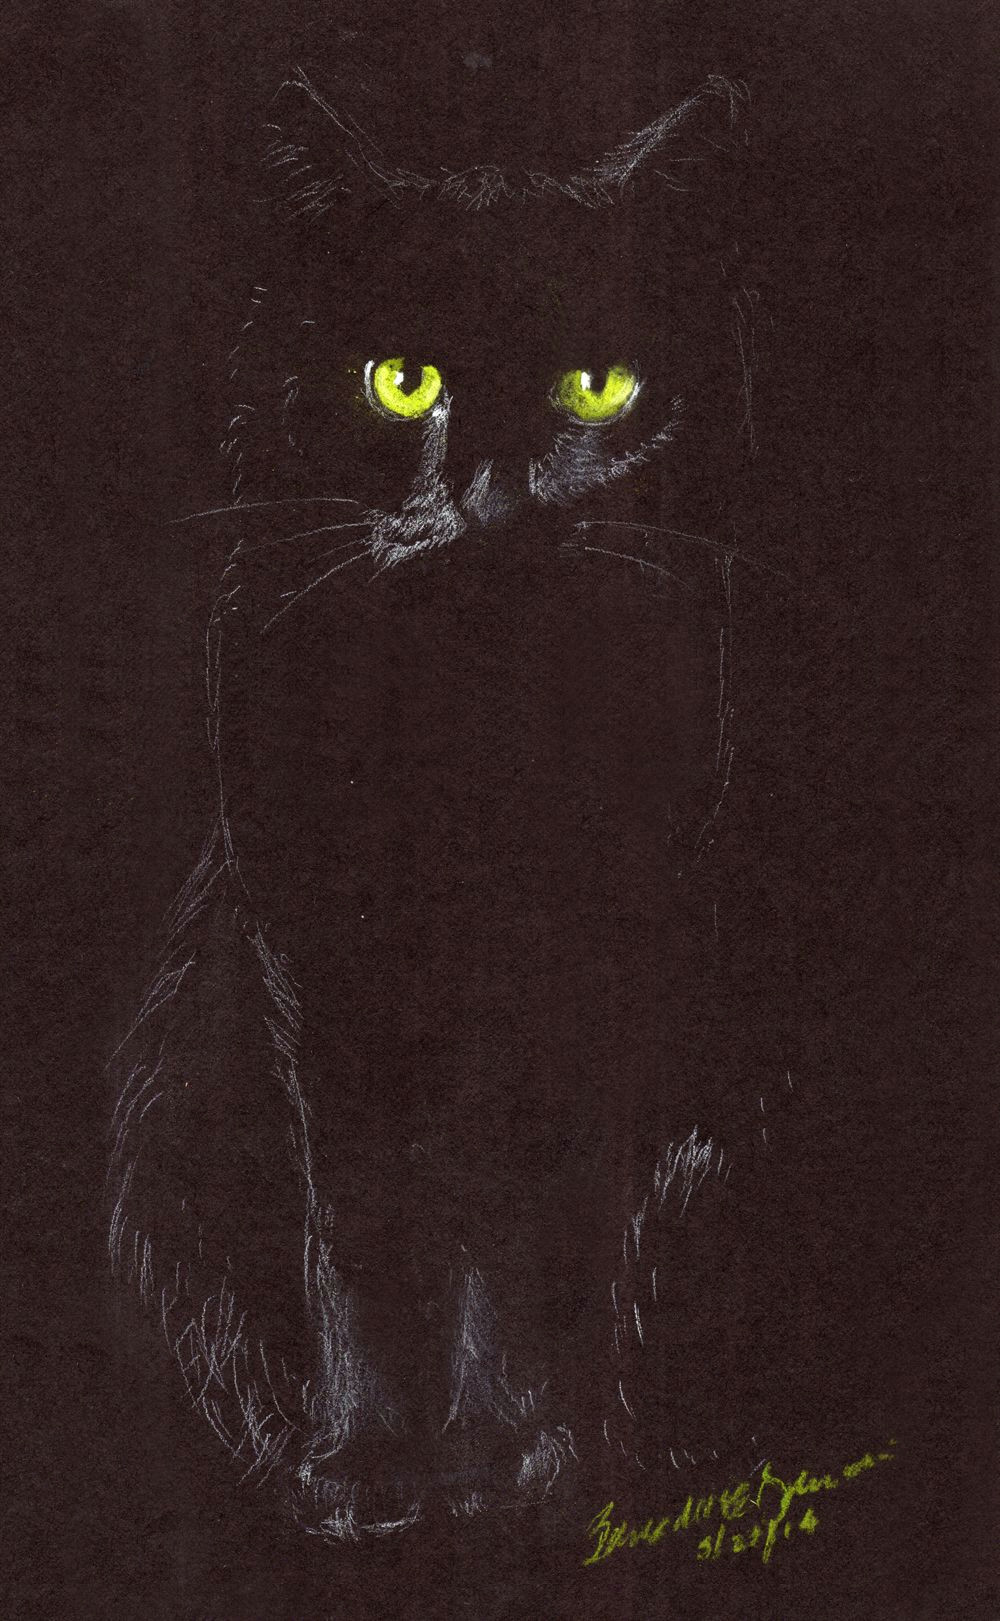 Drawing A Cat White On Black Paper Sitting In the Dark White Charcoal and Pastel Pencils On Black